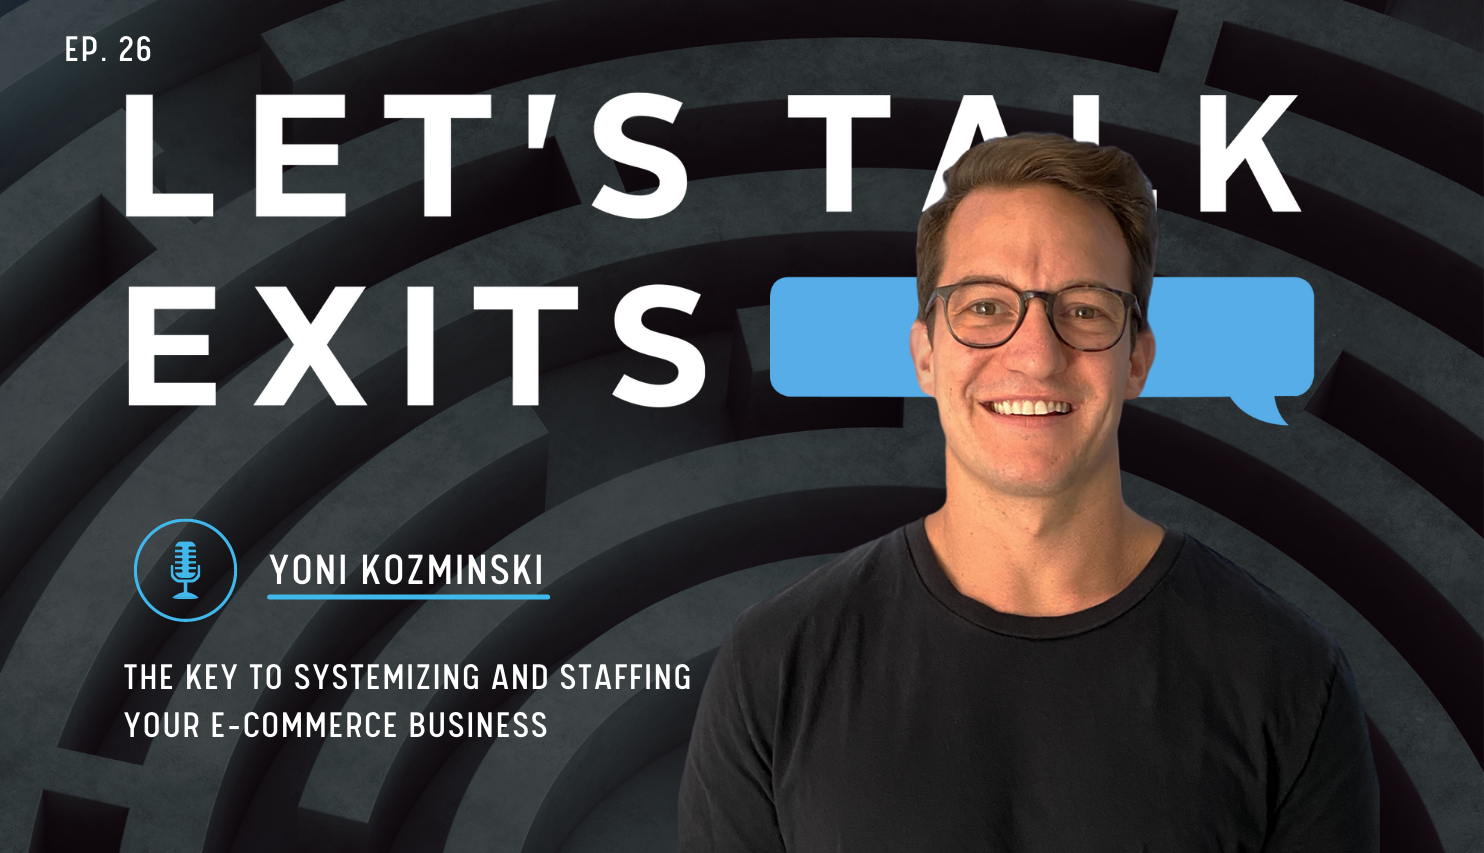 The Key to Systemizing and Staffing Your eCommerce Business with Yoni Kozminski